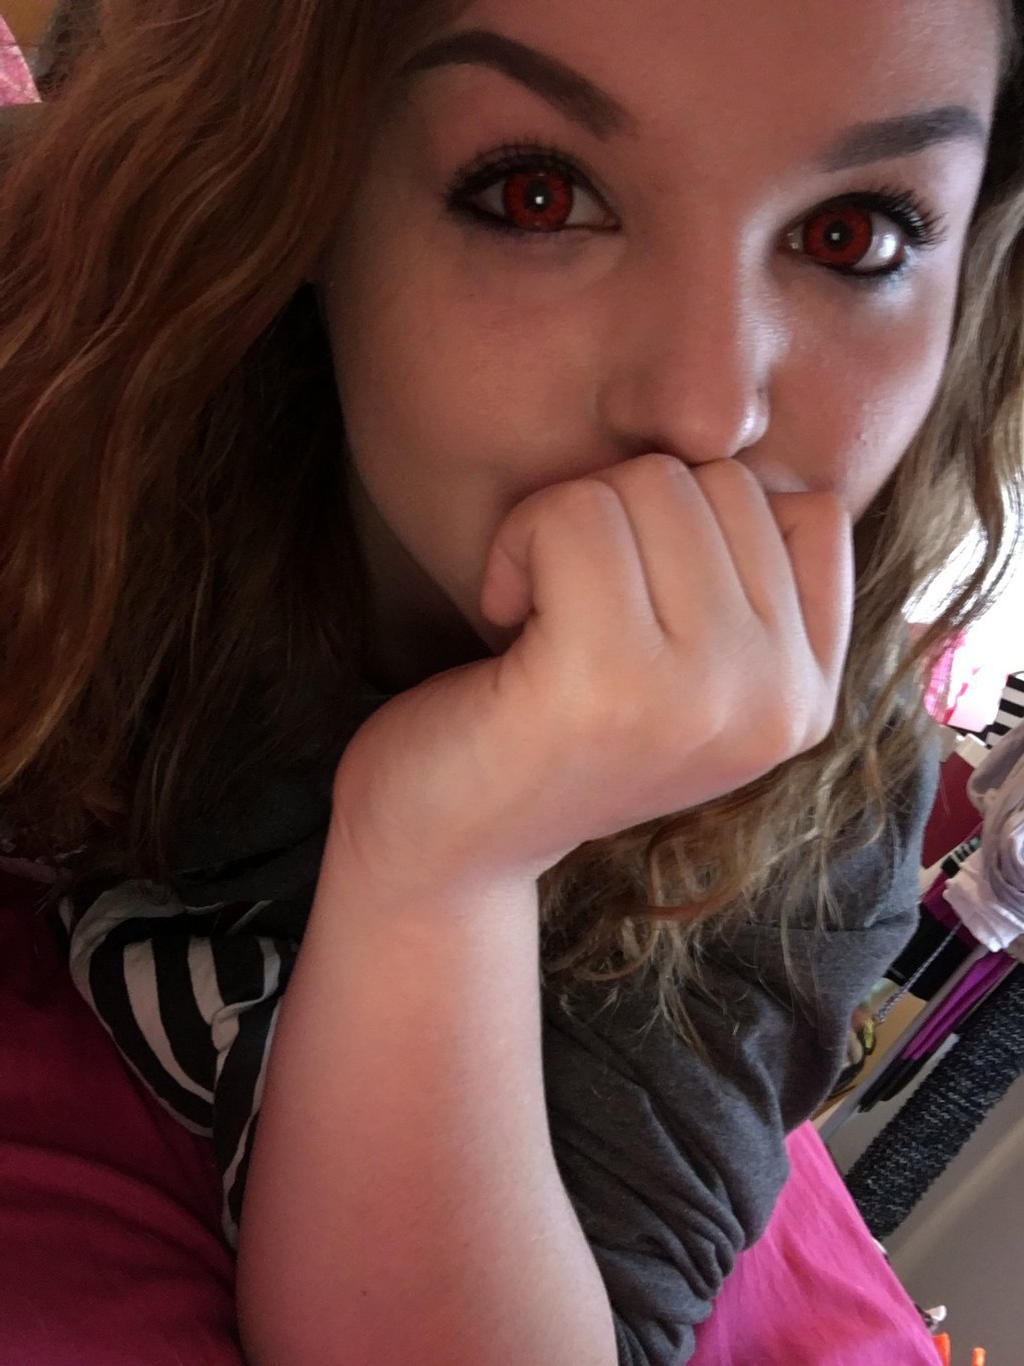 Haley in real life (even demons take selfies)